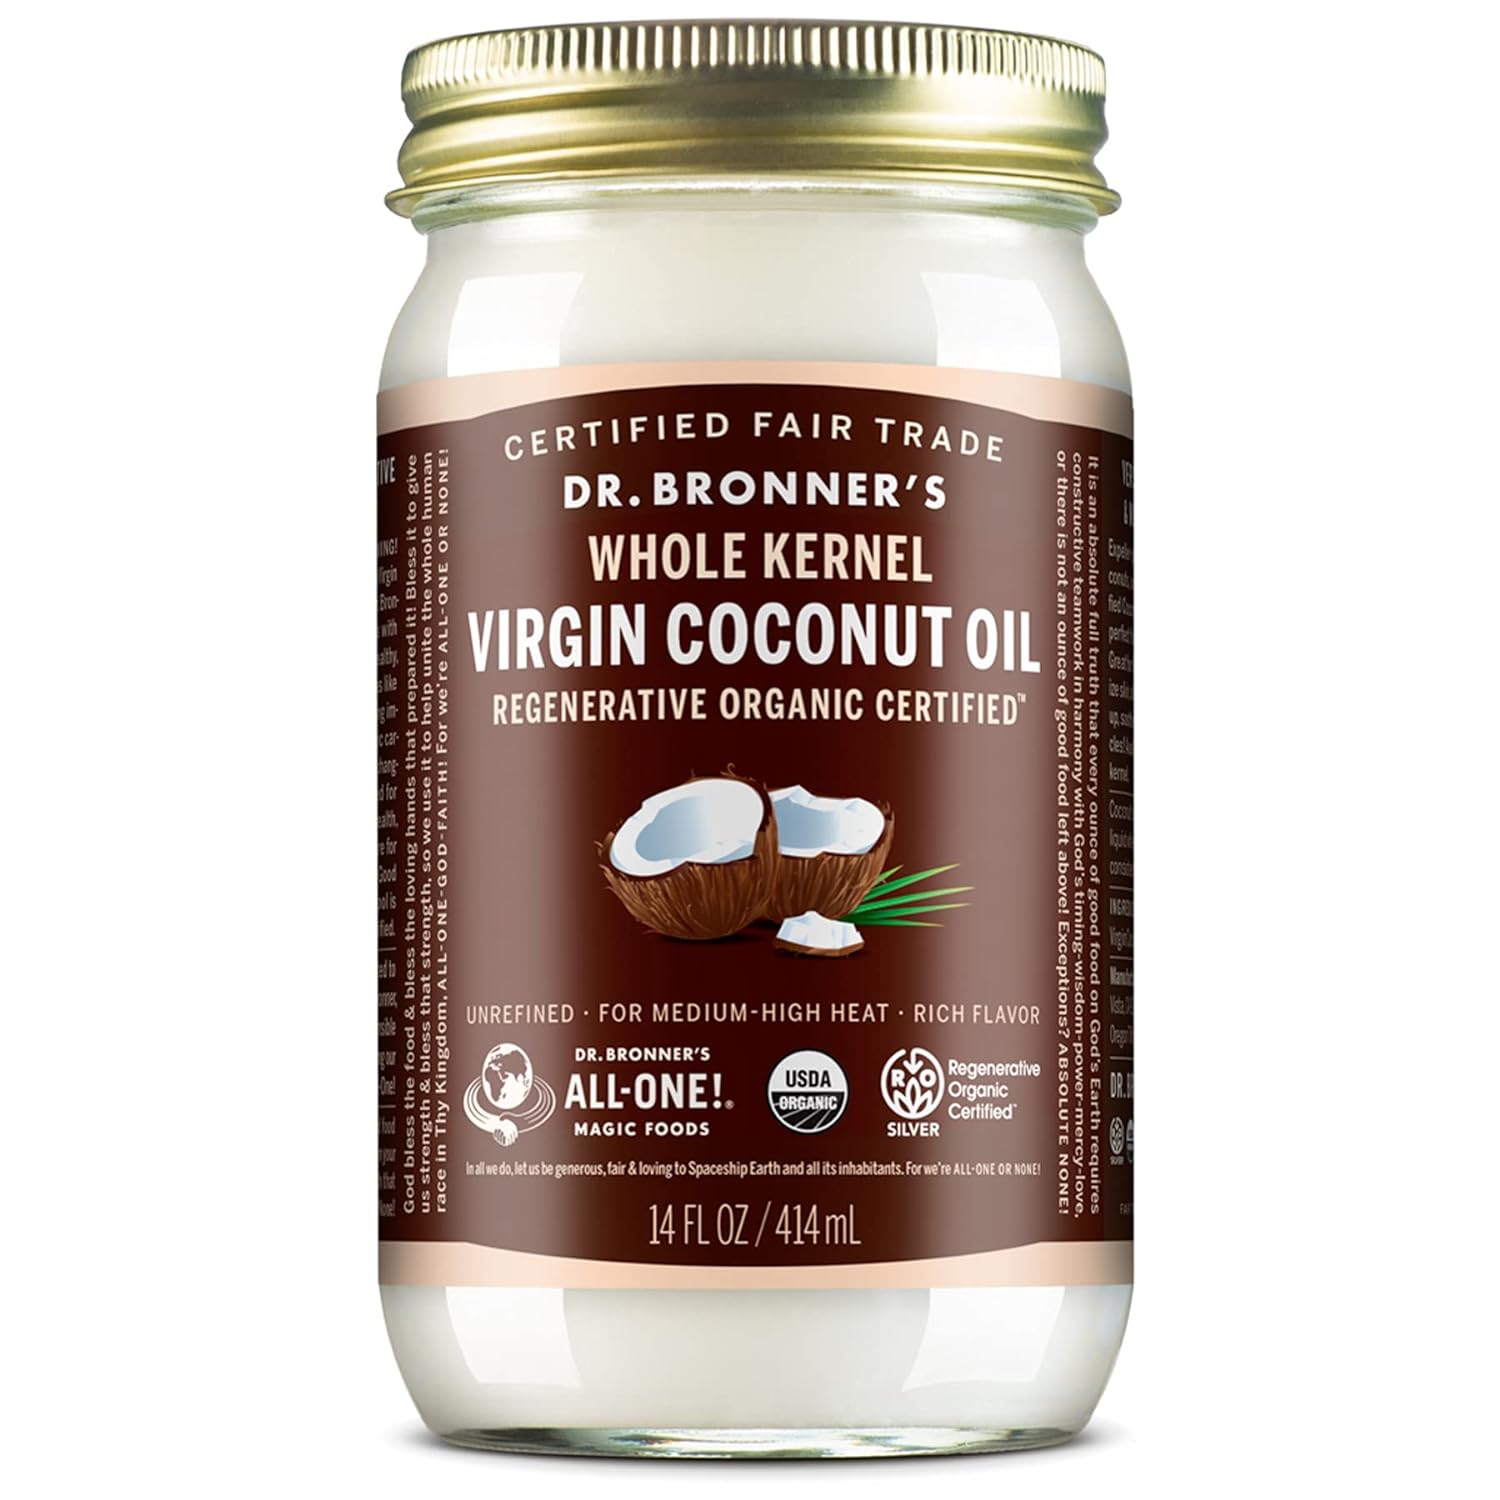 Dr. Bronner's - Organic Virgin Coconut Oil (Whole Kernel, 14 Ounce) - Coconut Oil for Cooking, Baking, Hair & Body, Unrefined & Fresh-Pressed, Rich & Nutty Flavor, Fair Trade, Vegan, Non-GMO